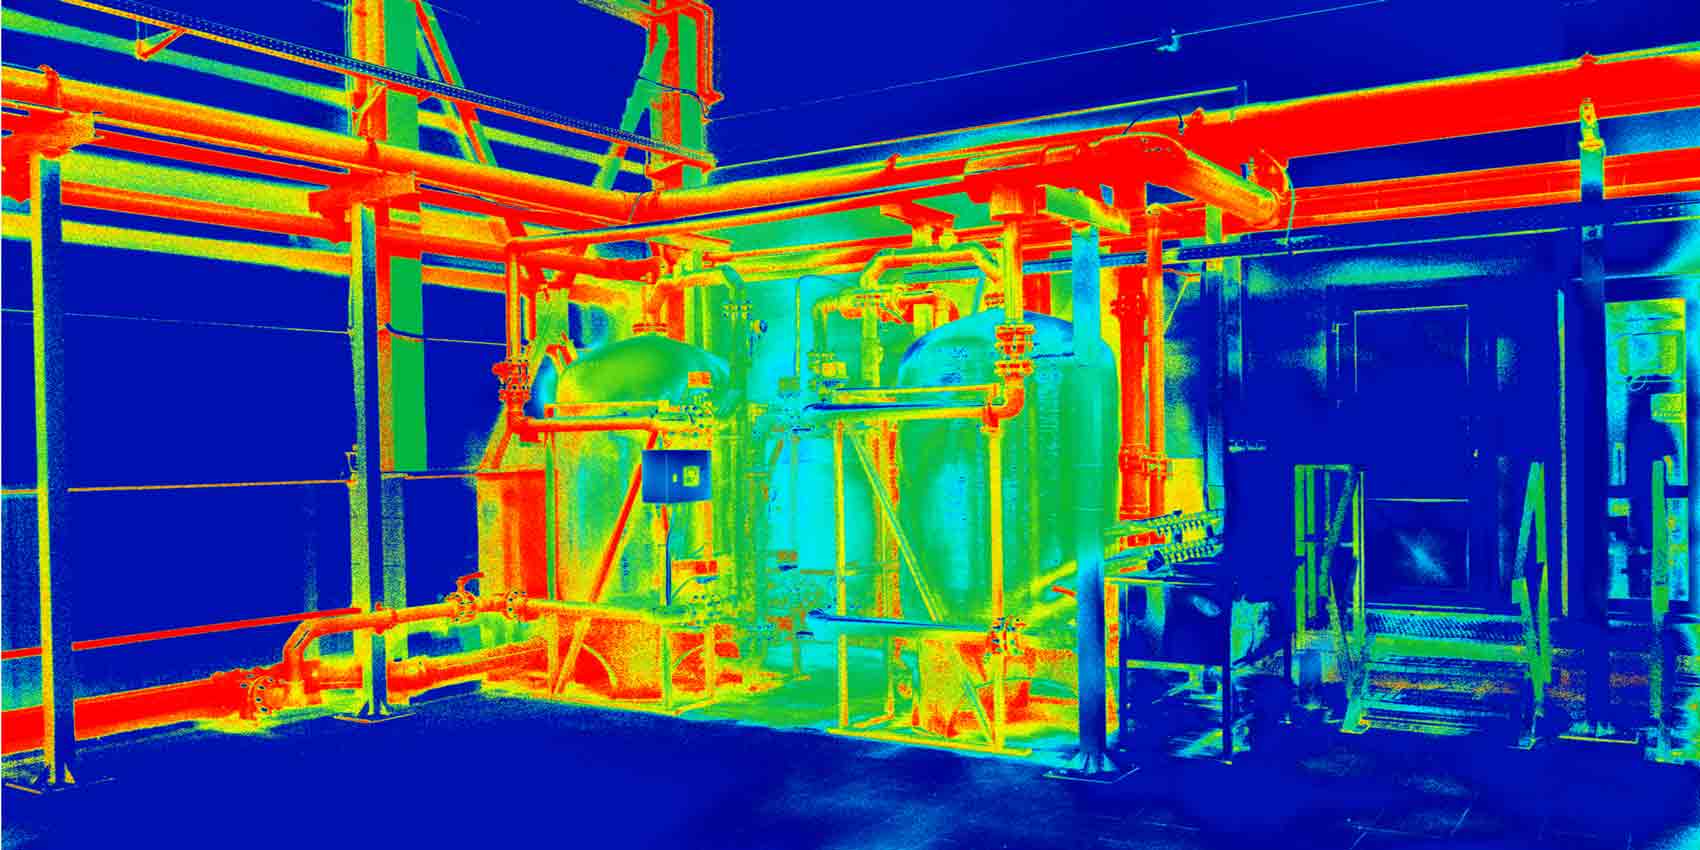 Cooled and uncooled thermal imaging